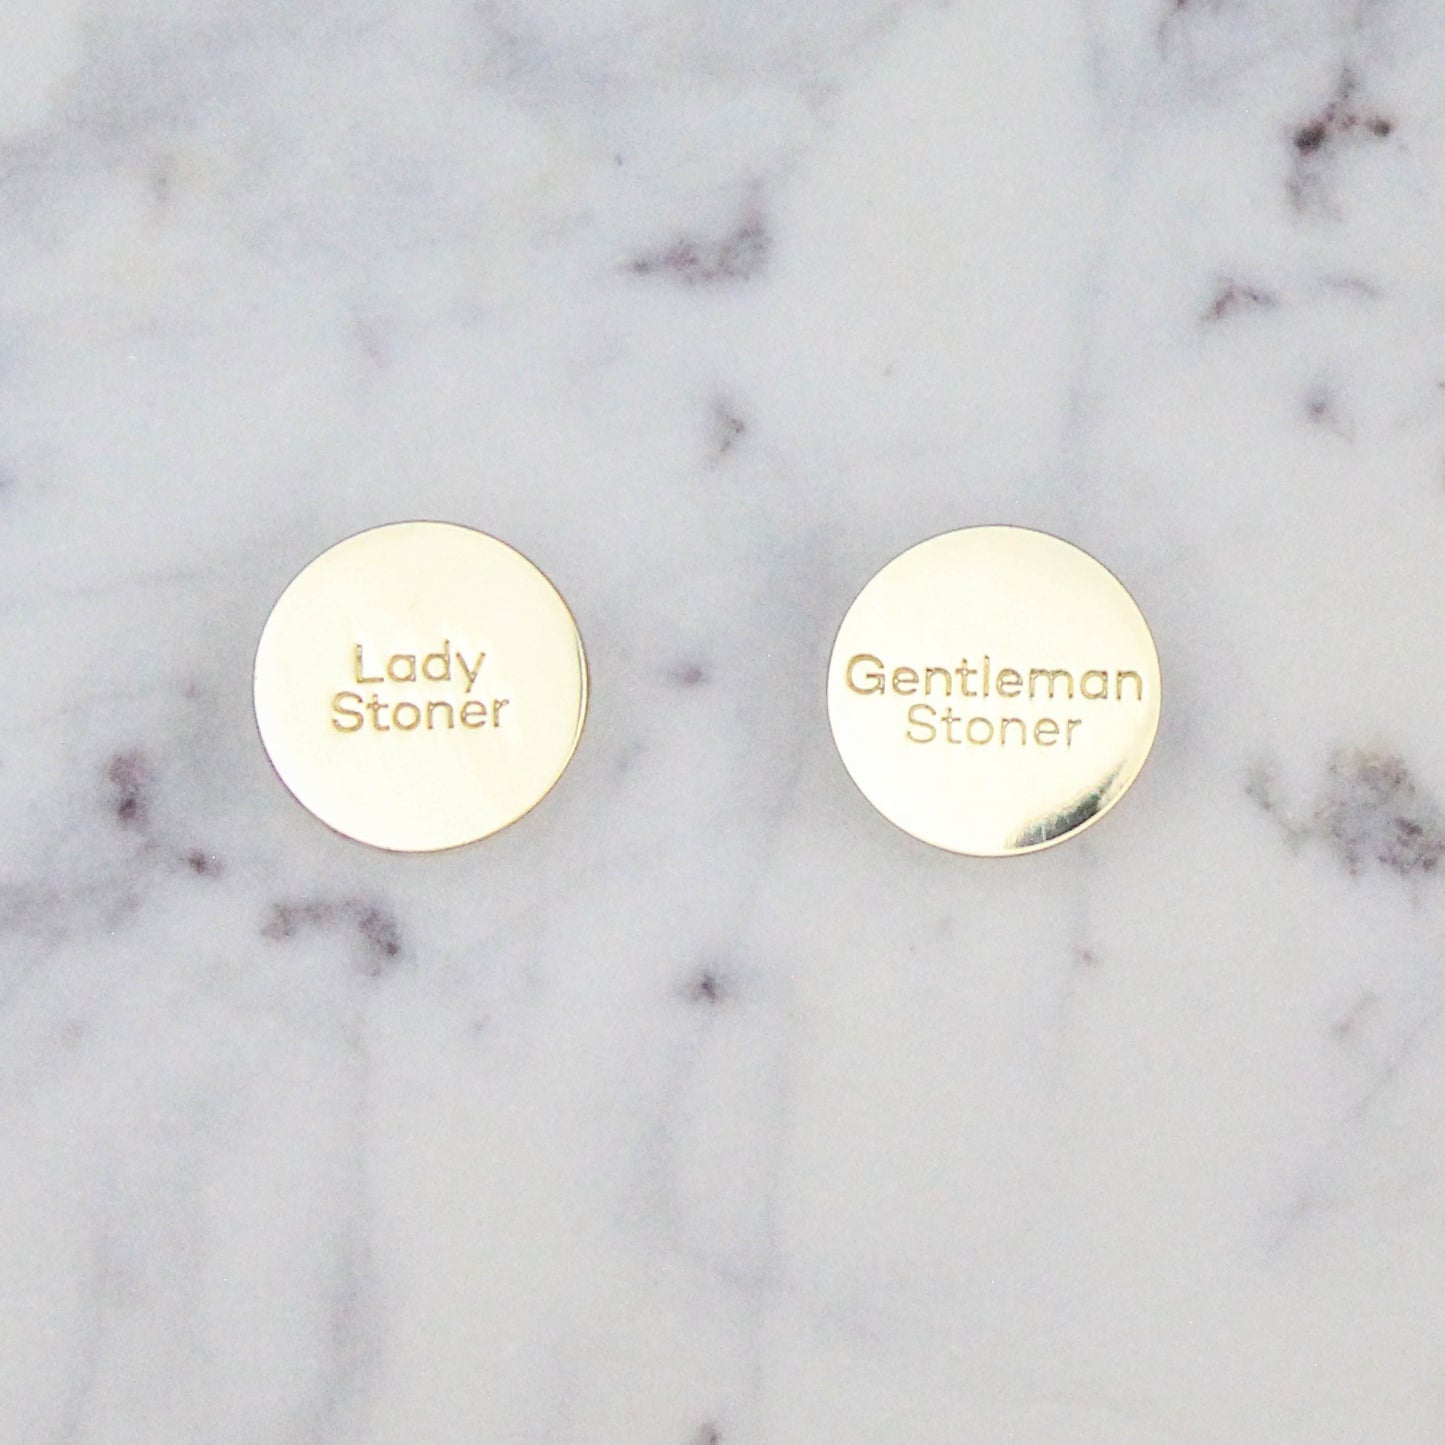 lady stoner and gentleman stoner gold enamel pin buttons